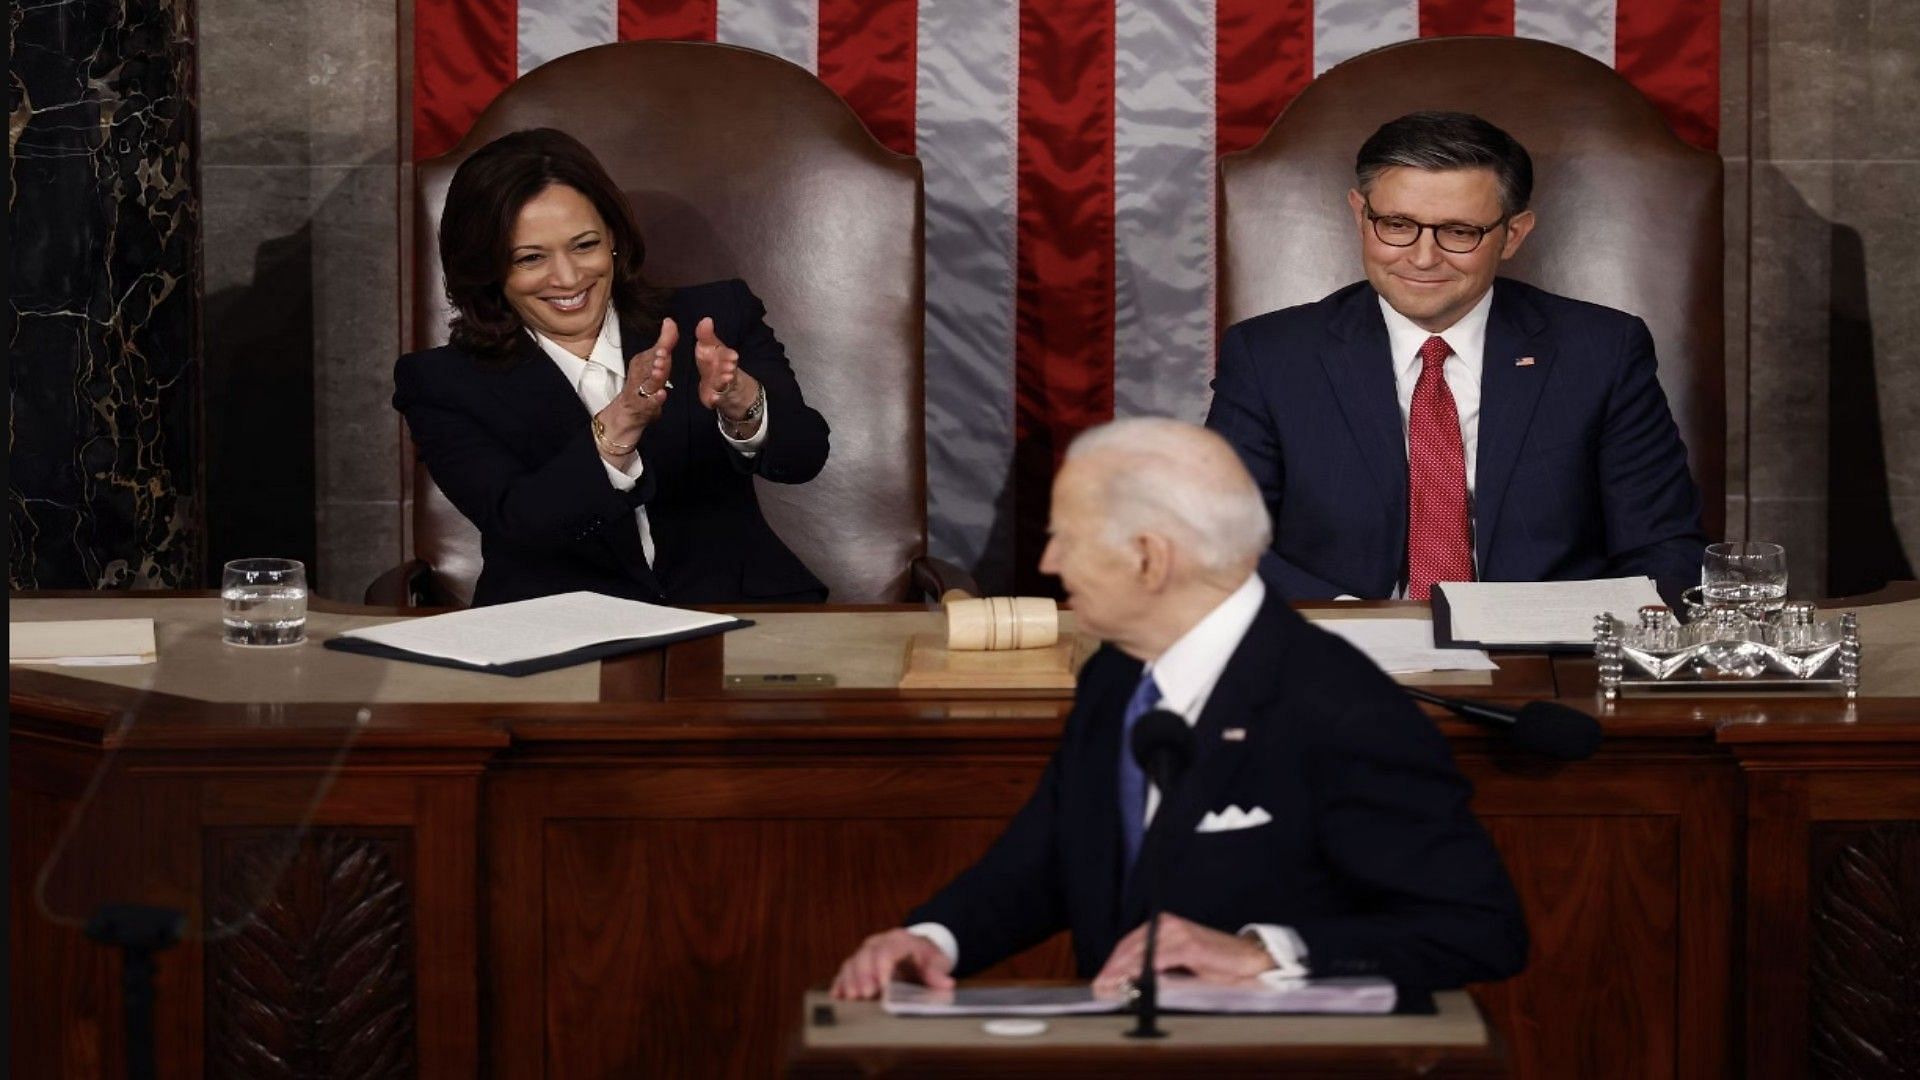 President Biden Delivers State Of The Union Address (Photo by Chip Somodevilla/Getty Images)